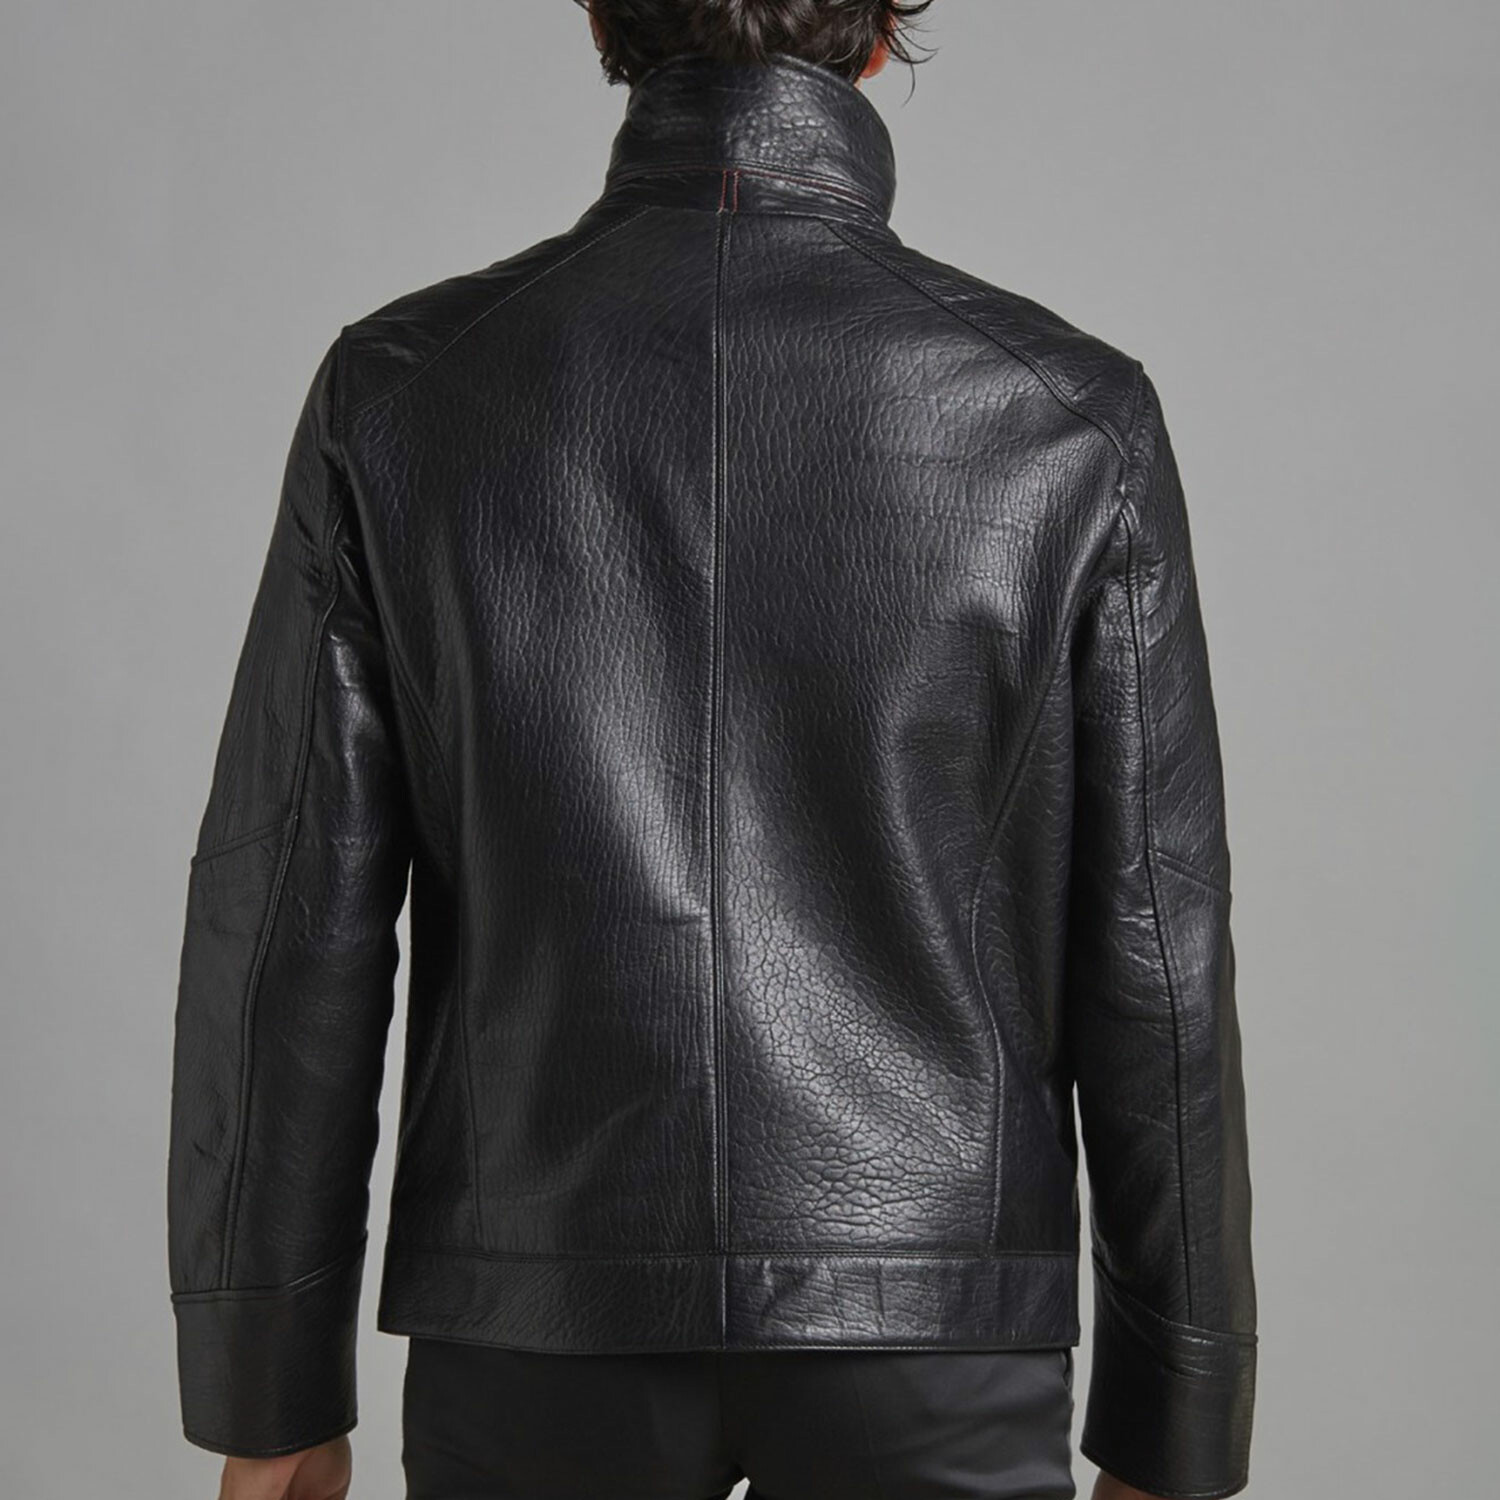 Jacob Leather Jacket // Black (XL) - TOMO Outerwear Clearance Event ...